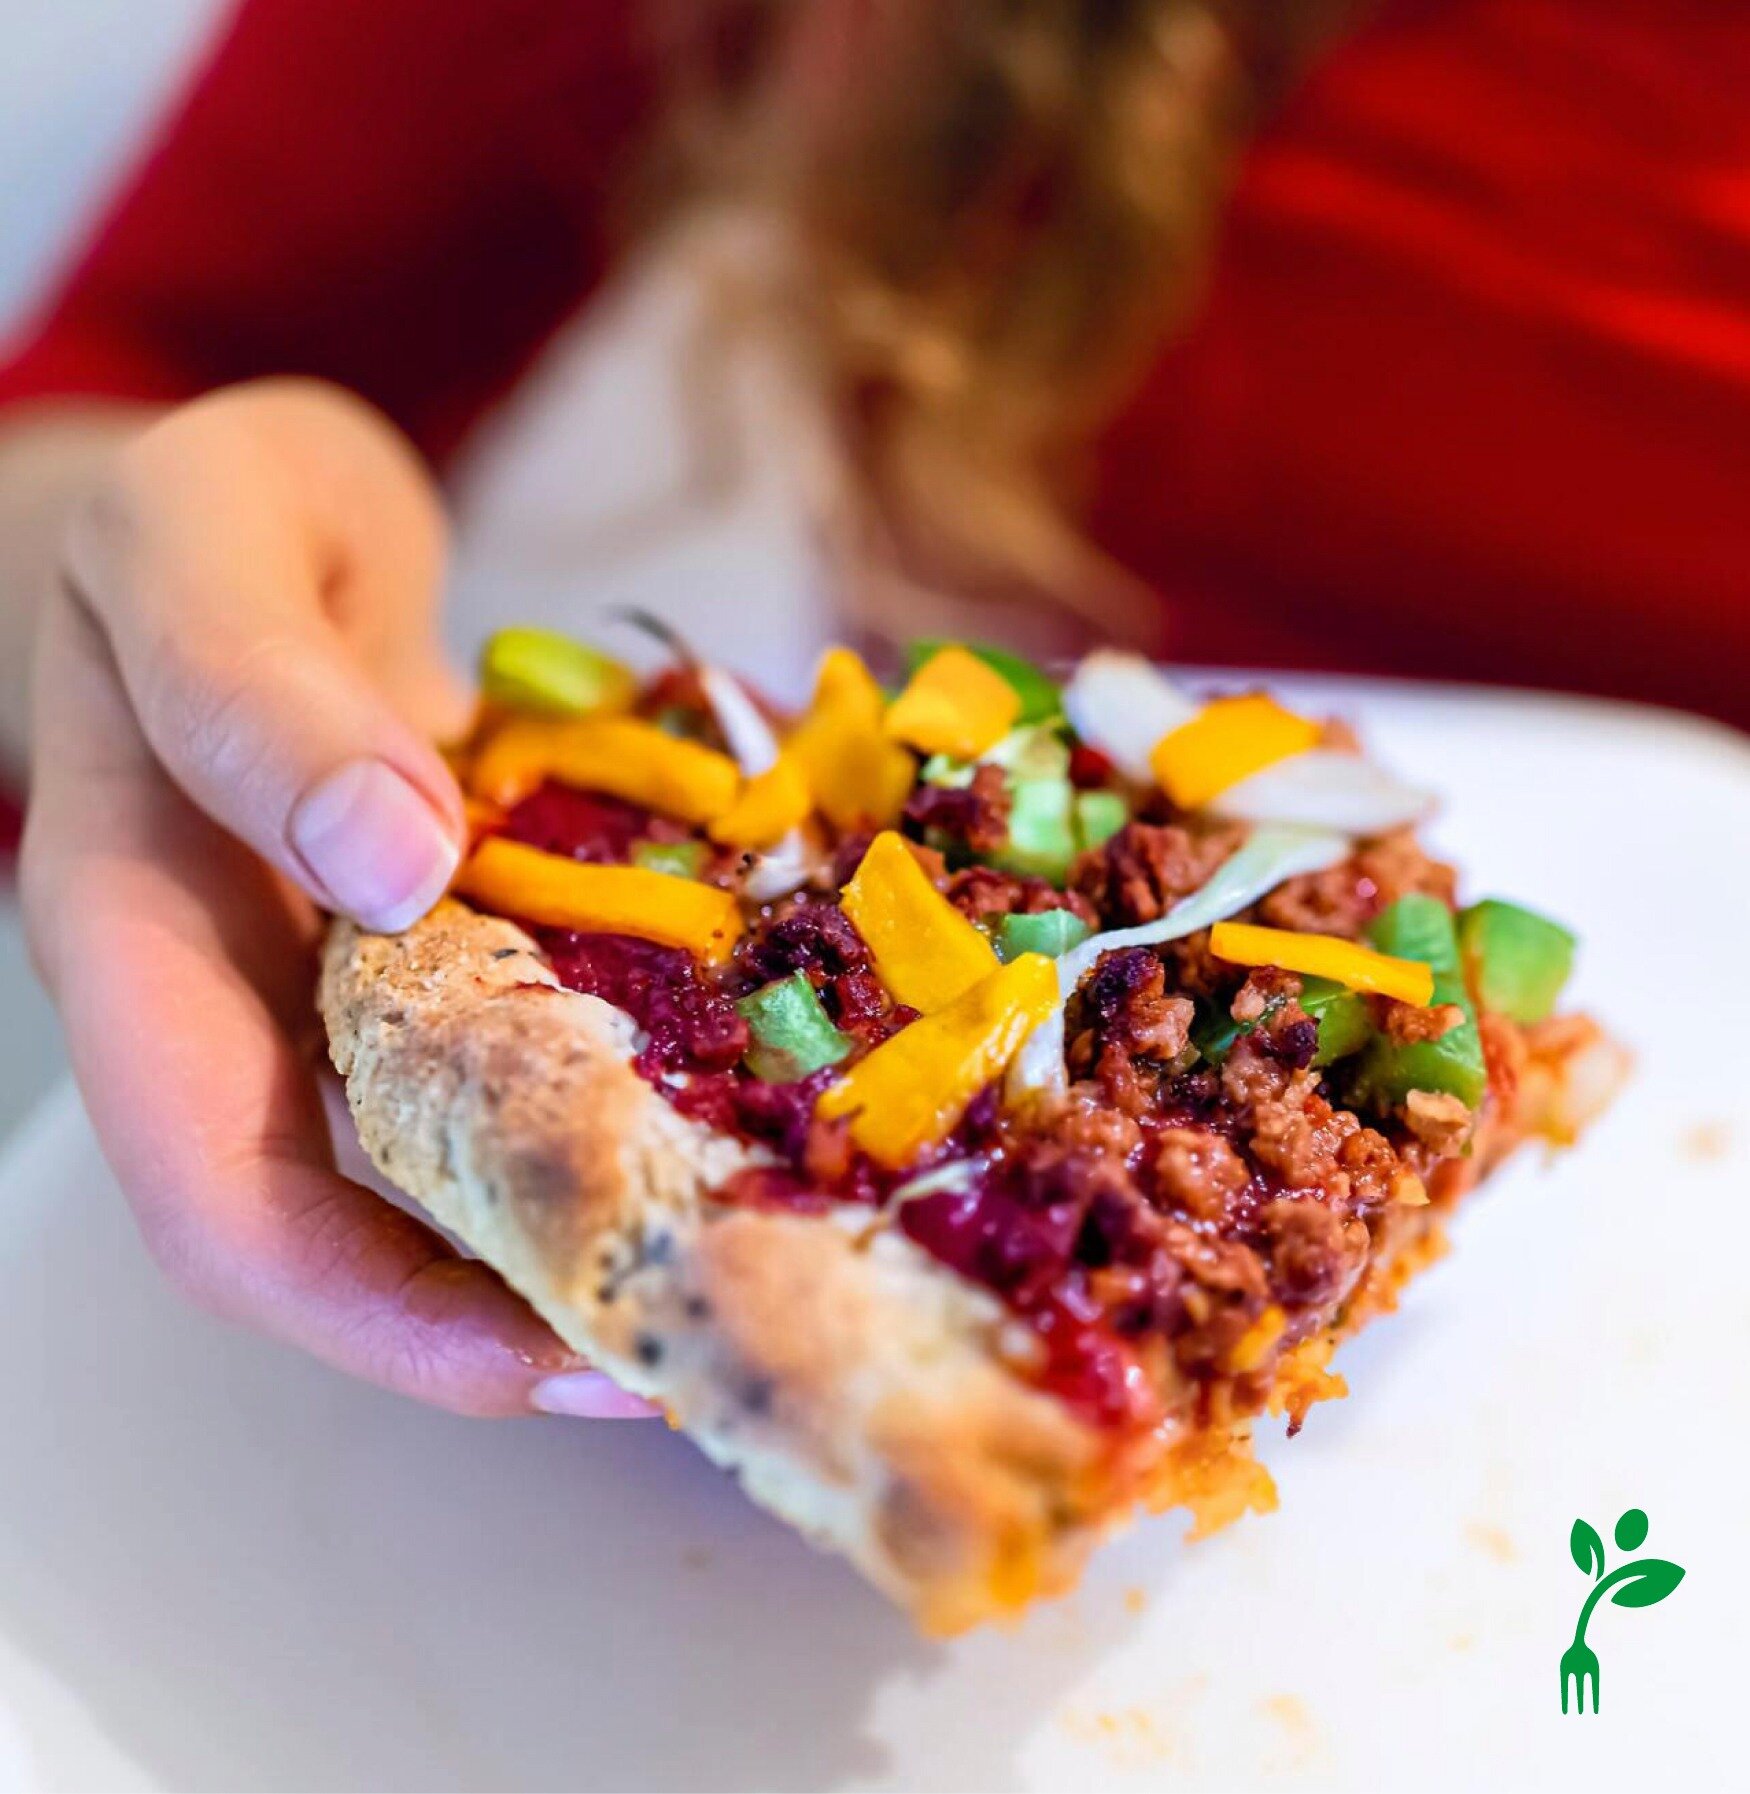 🍕 Pizza night just got better with Plantasia Meat Crumbles. Top your pizza with plant-based goodness and savor every slice. 

#PlantBasedPizzatoppings #MeatlessMagic